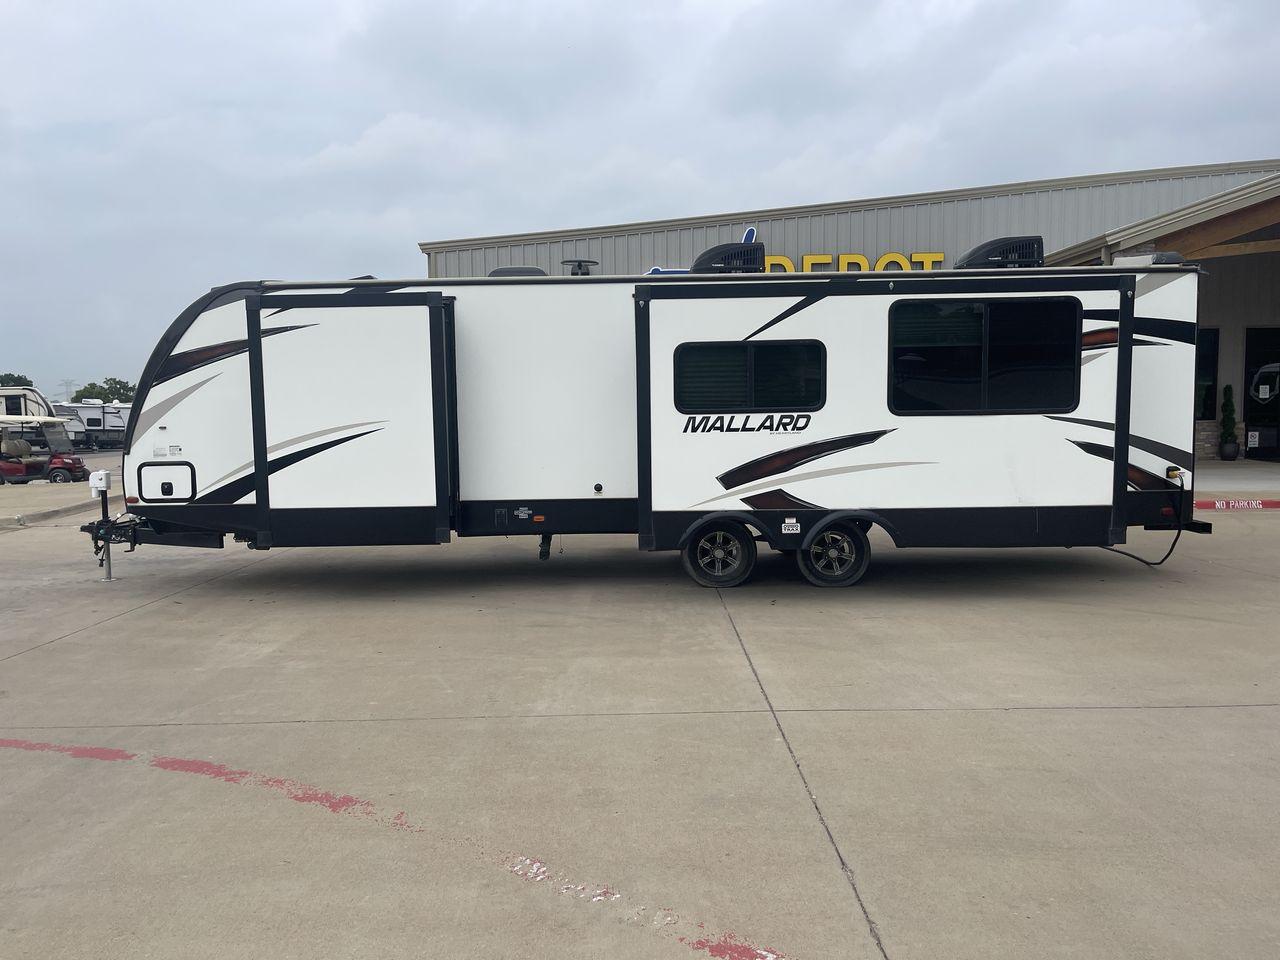 2018 HEARTLAND RECREATION MALLARD M302 (5SFNB3623JE) , Length: 36.7 ft. | Dry Weight: 6,795 lbs. lbs | Gross Weight: 8,600 lbs | Slides: 2 transmission, located at 4319 N Main Street, Cleburne, TX, 76033, (817) 221-0660, 32.435829, -97.384178 - The 2018 Heartland Recreation Mallard M302 is 36.7 feet long and weighs 6,795 pounds dry, so it's both roomy and easy to pull. It is built to last with an aluminum body and fiberglass sidewalls, so you can count on it for your car trips. This trailer's two slides make the most of the space inside, g - Photo #24